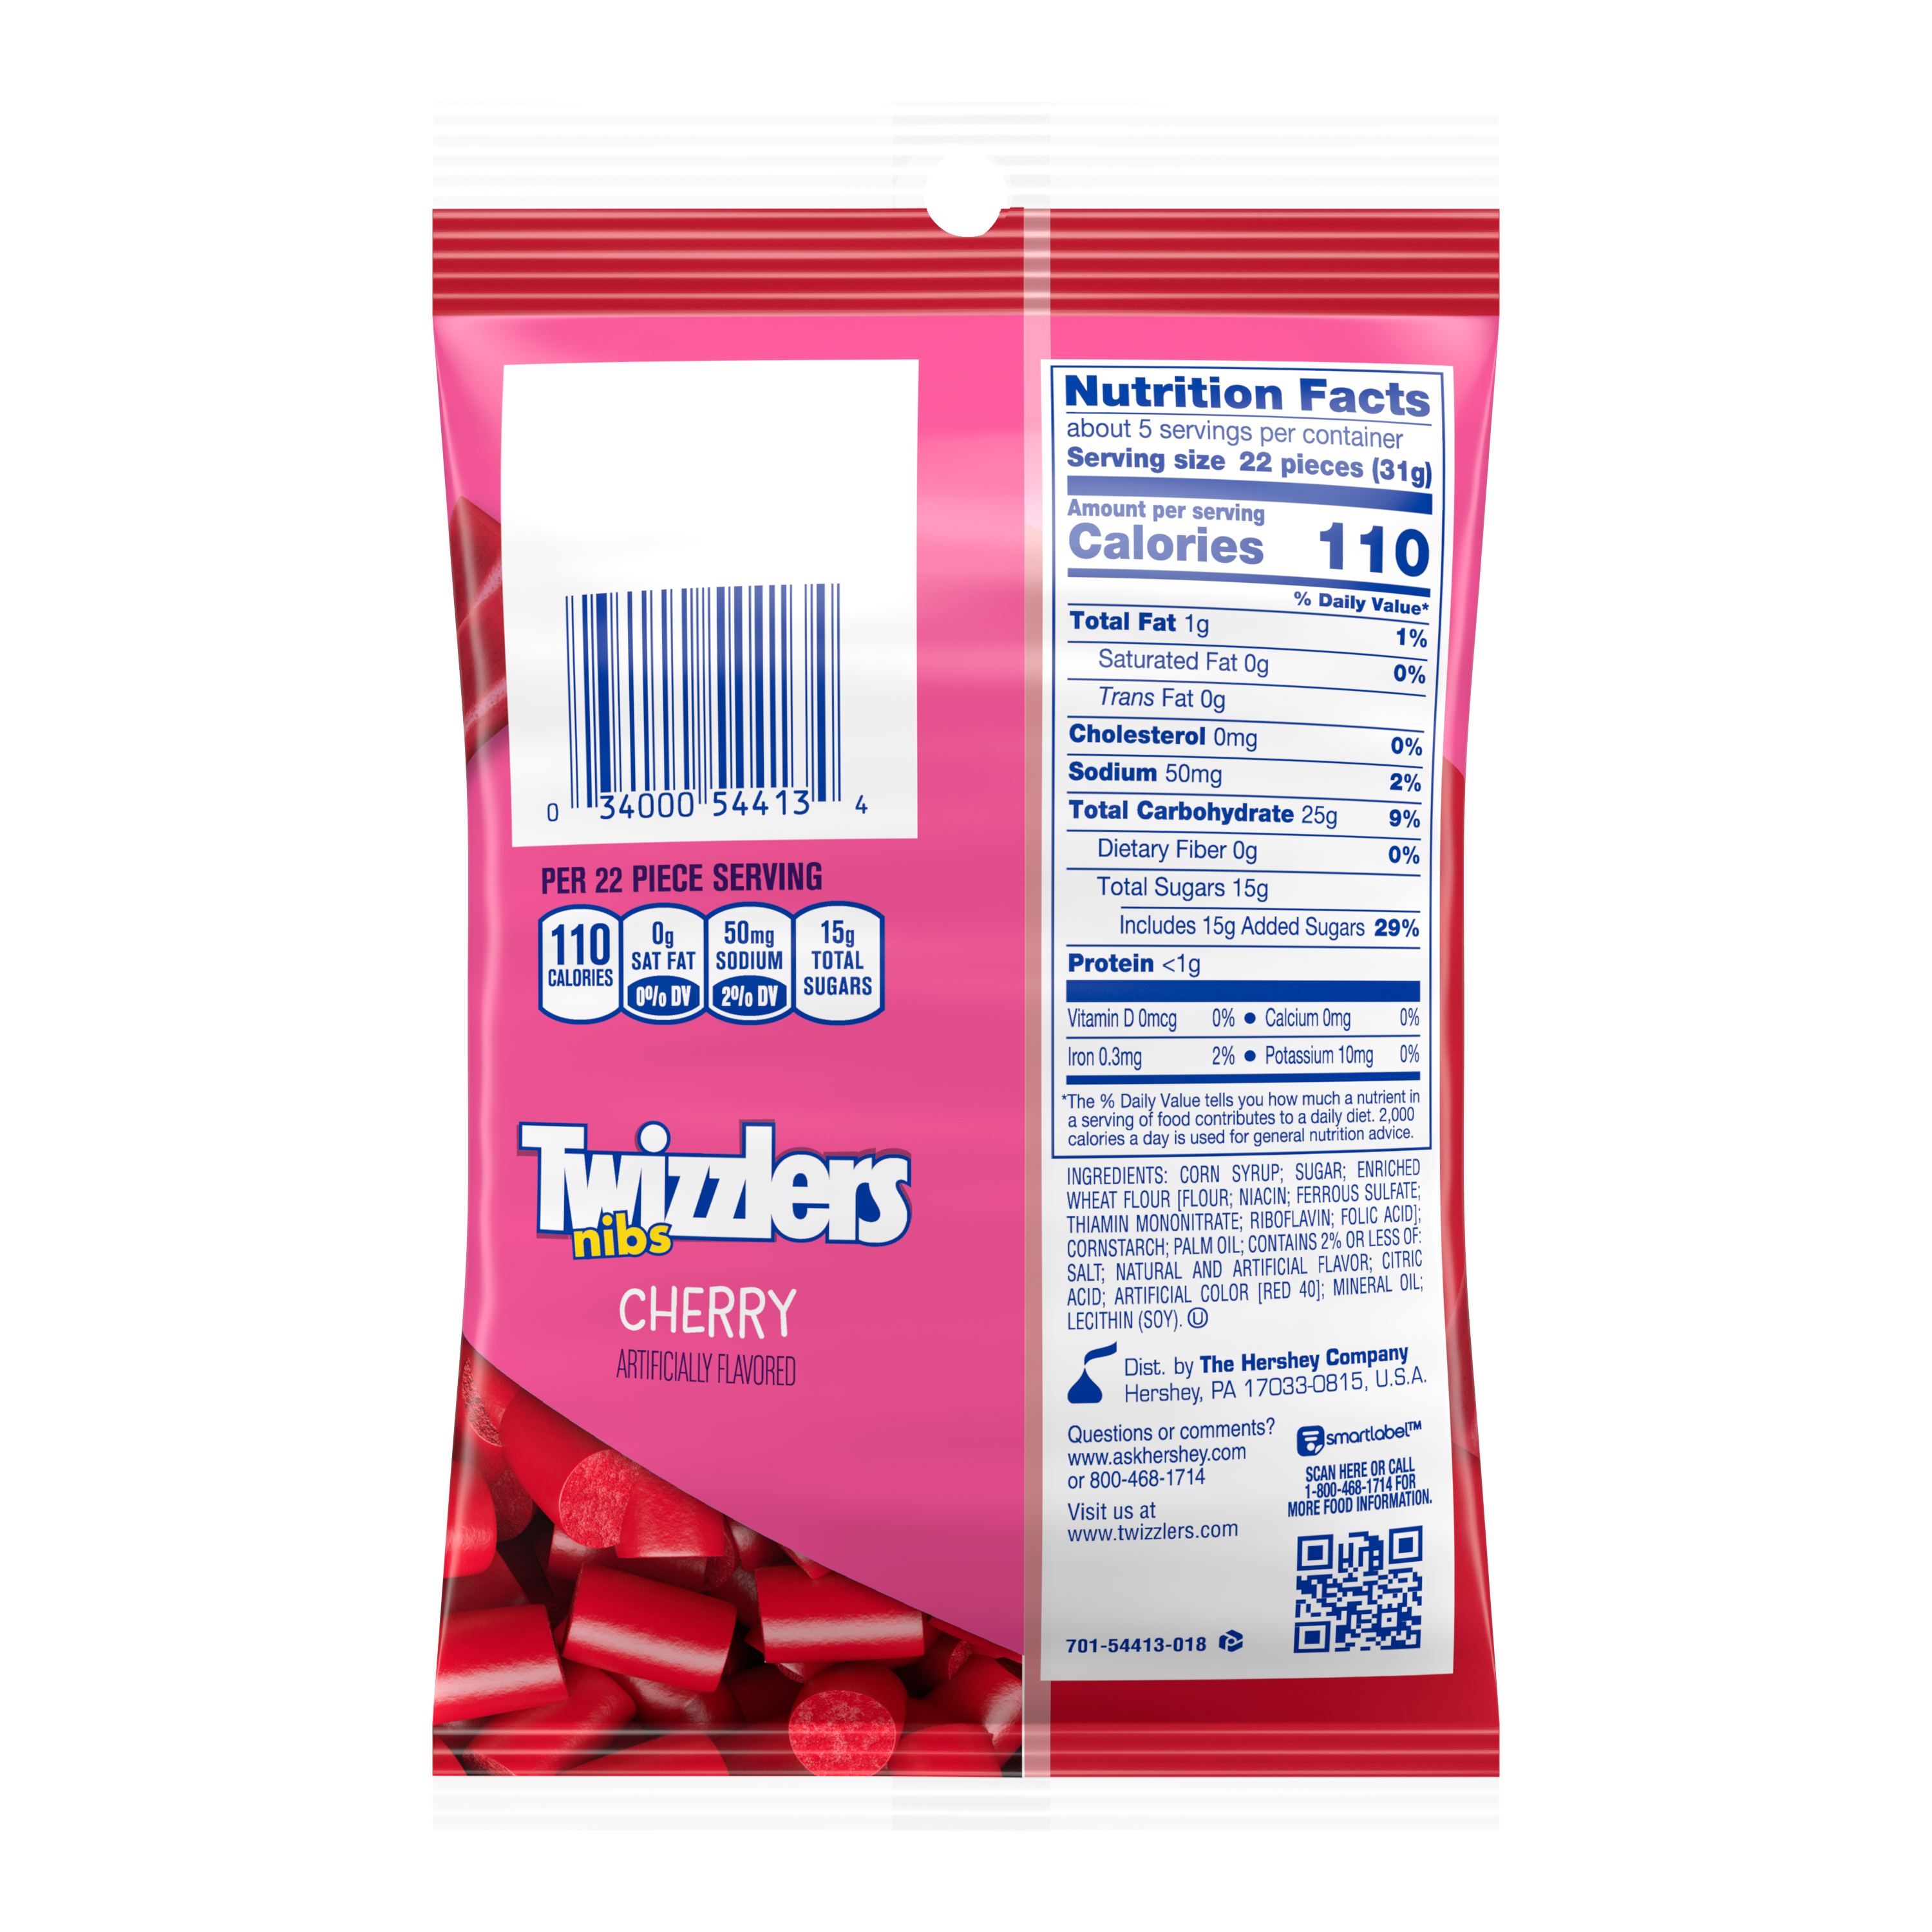 TWIZZLERS NIBS Cherry Flavored Candy, 6 oz bag - Back of Package